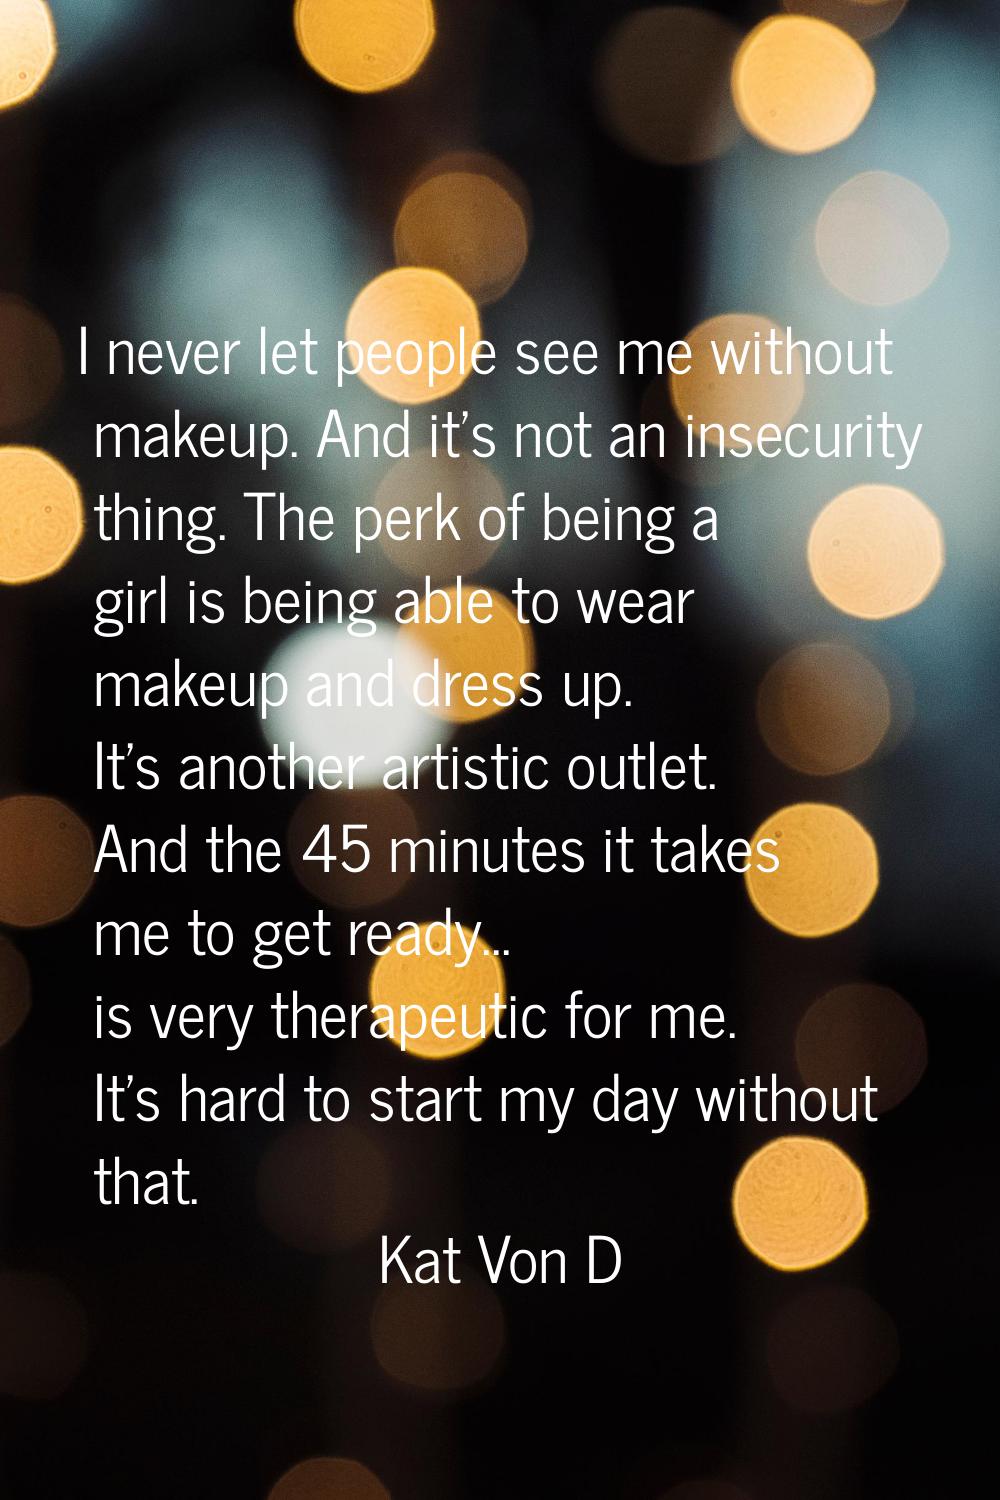 I never let people see me without makeup. And it's not an insecurity thing. The perk of being a gir